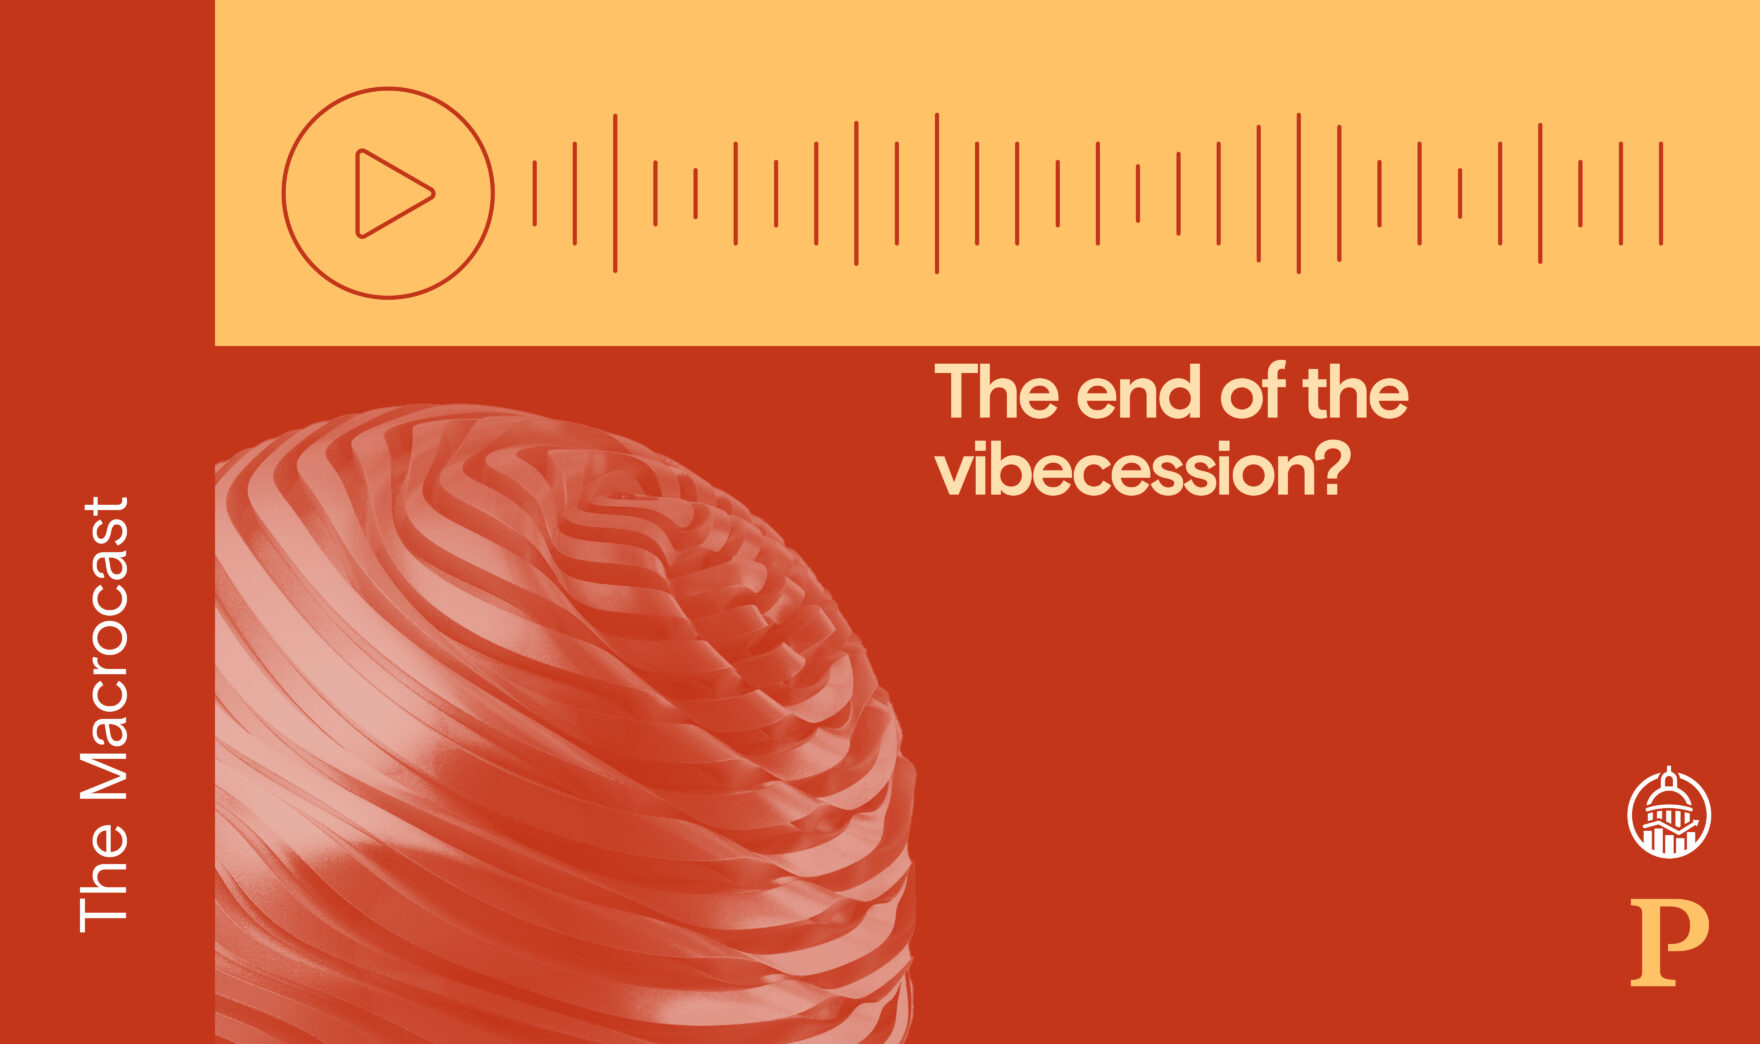 Macrocast: The end of the vibecession?